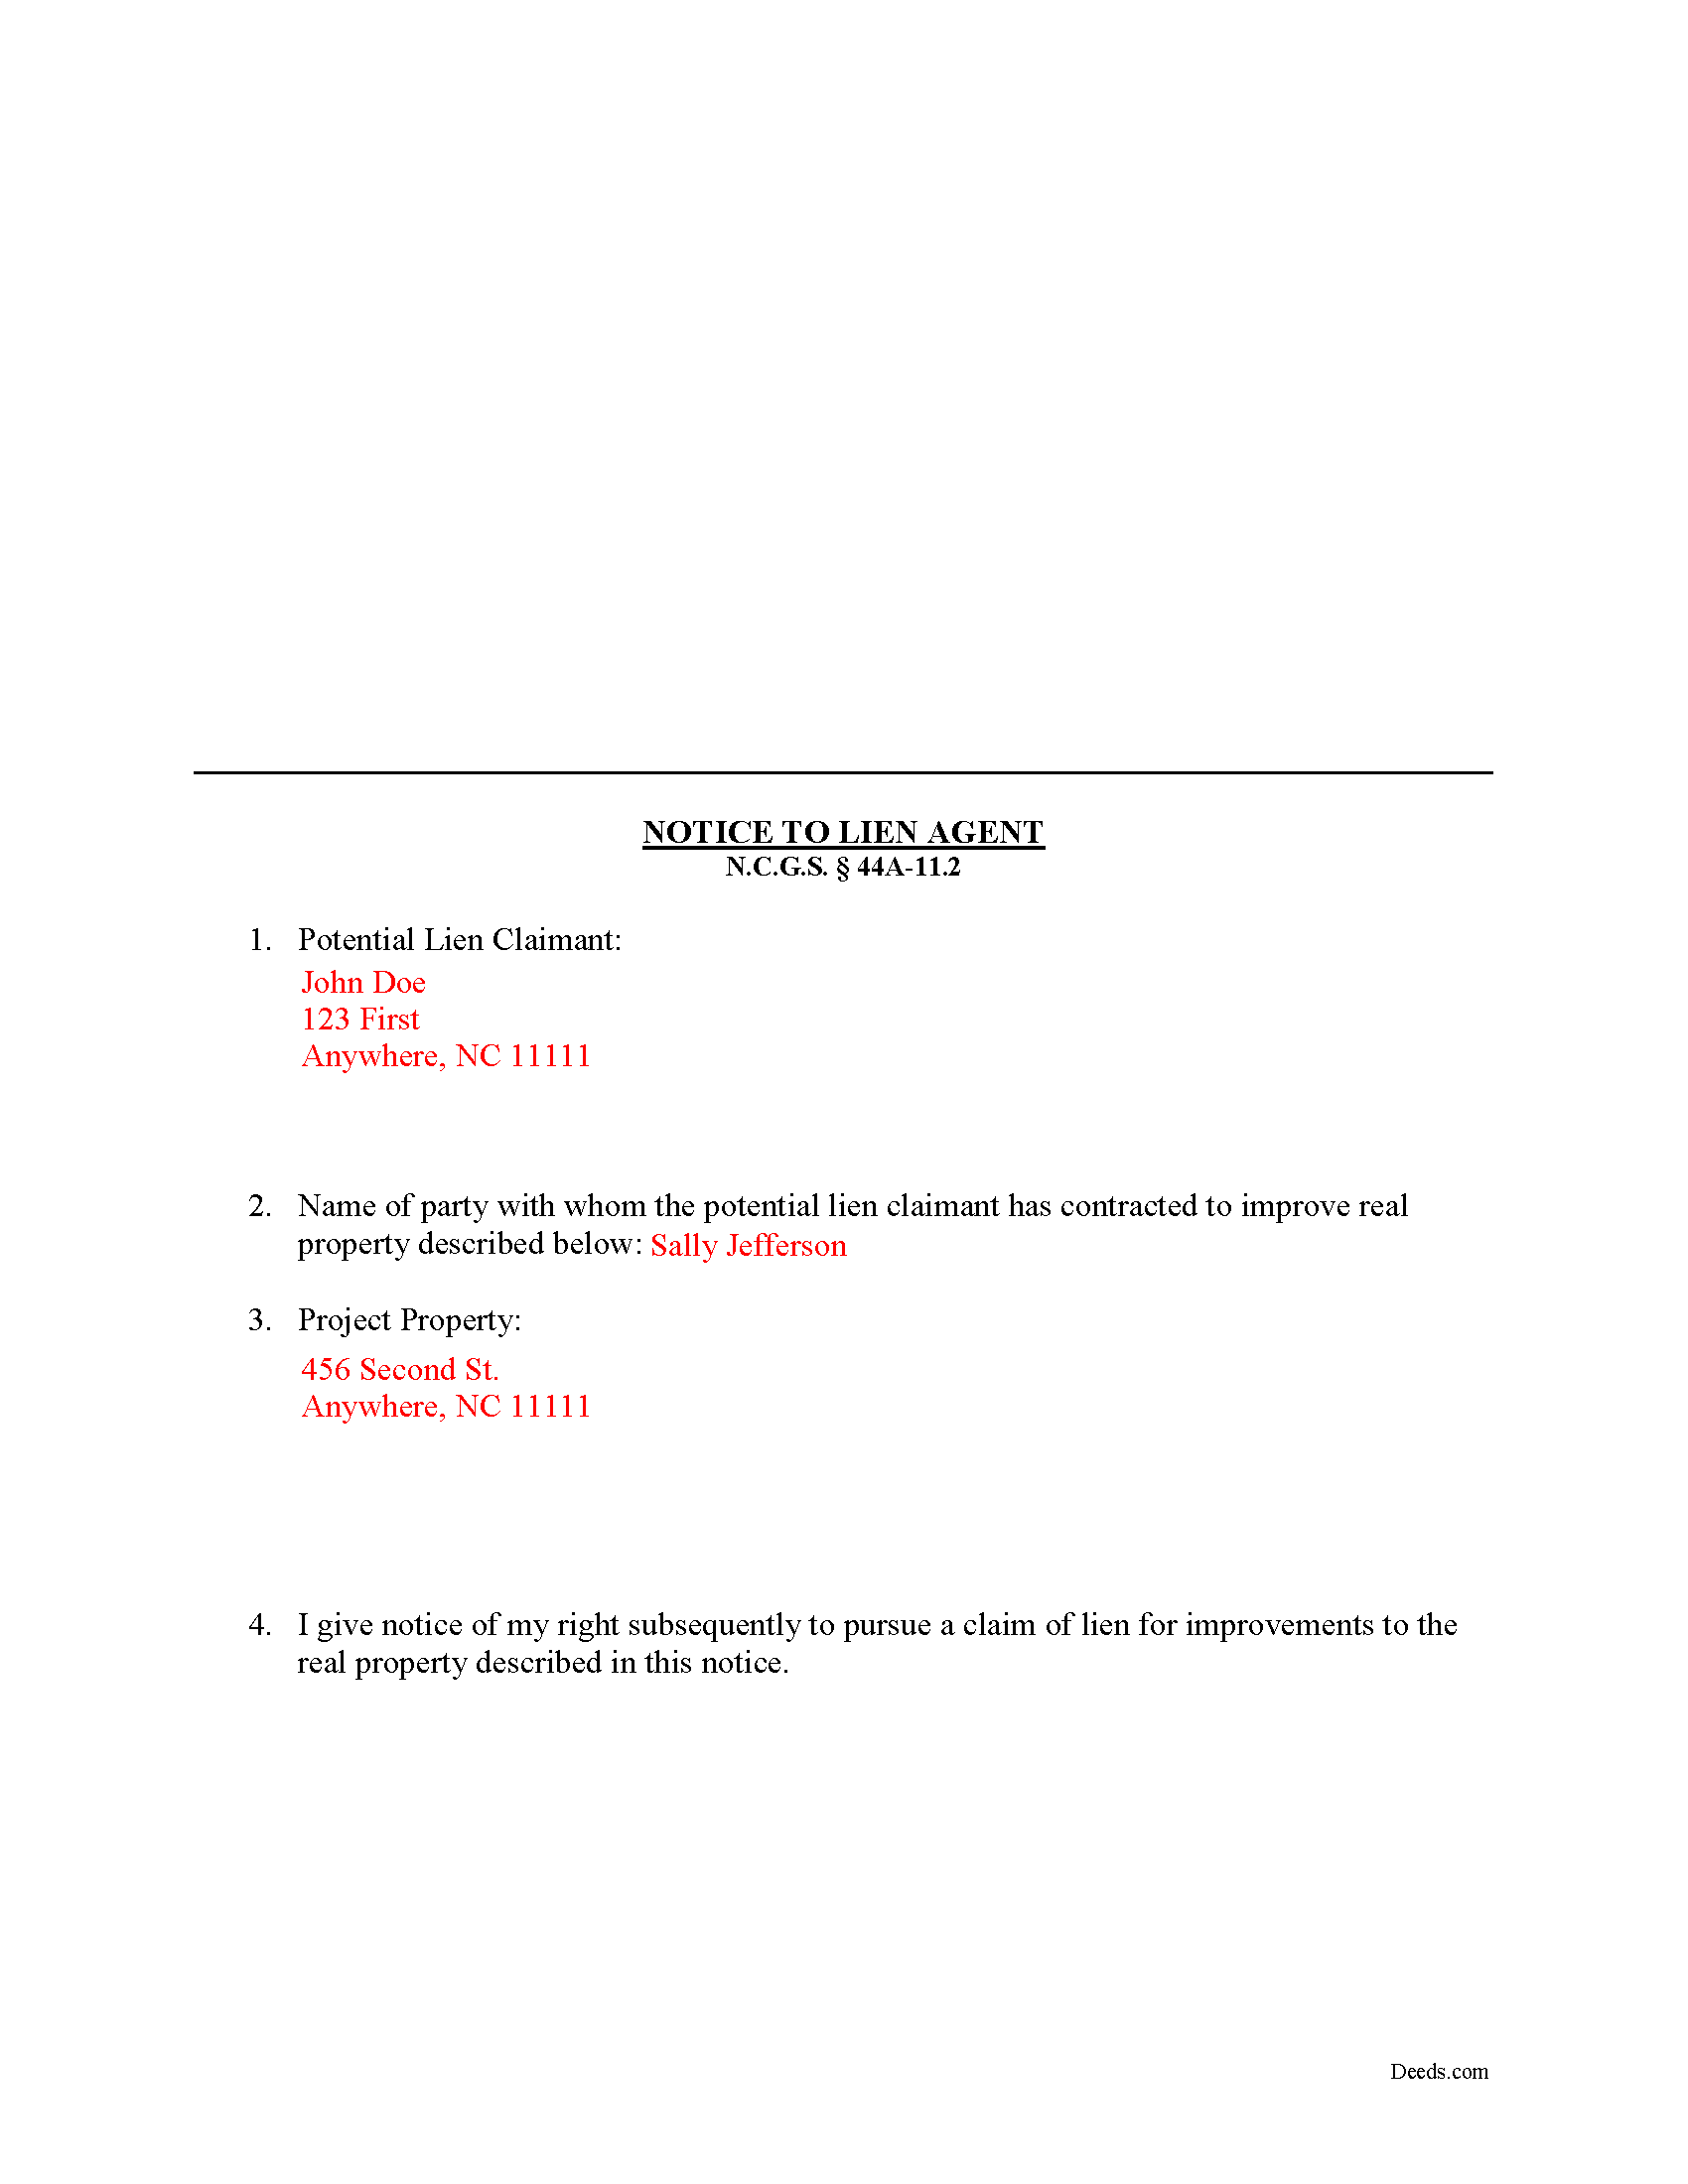 Completed Example of the Notice of Lien Agent Document